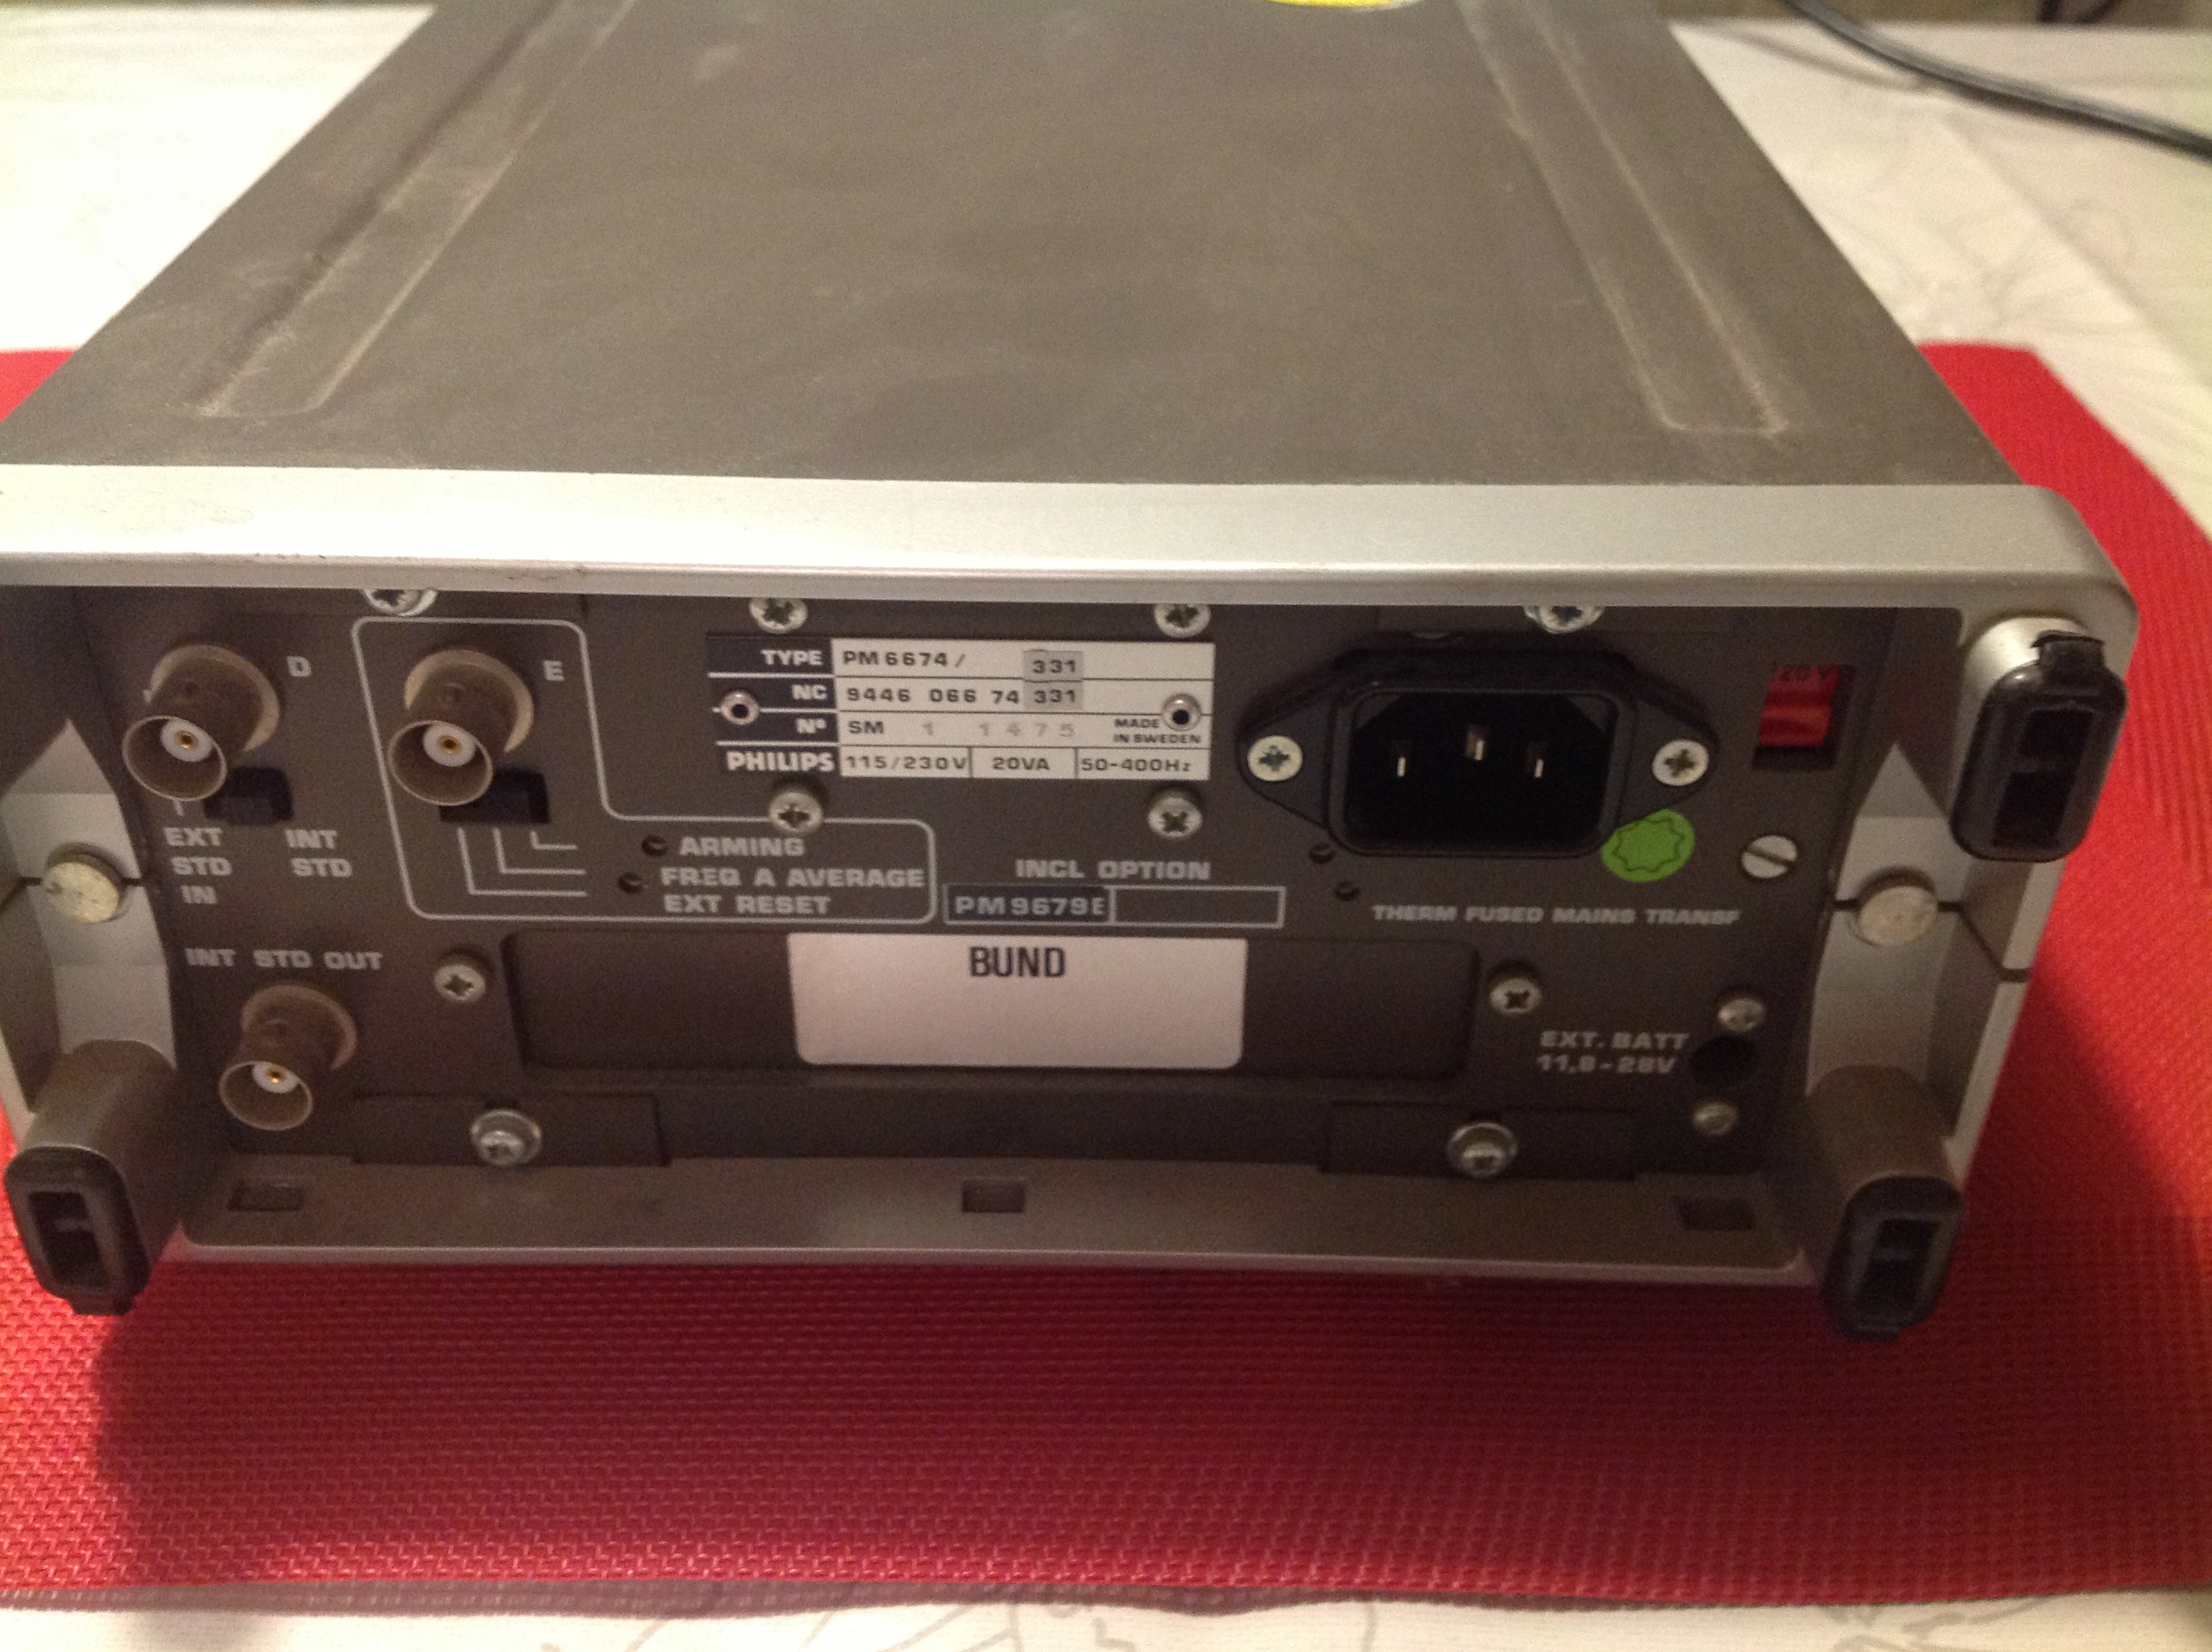 Philips PM 6674 Universal Frequency Counter 550 MHz